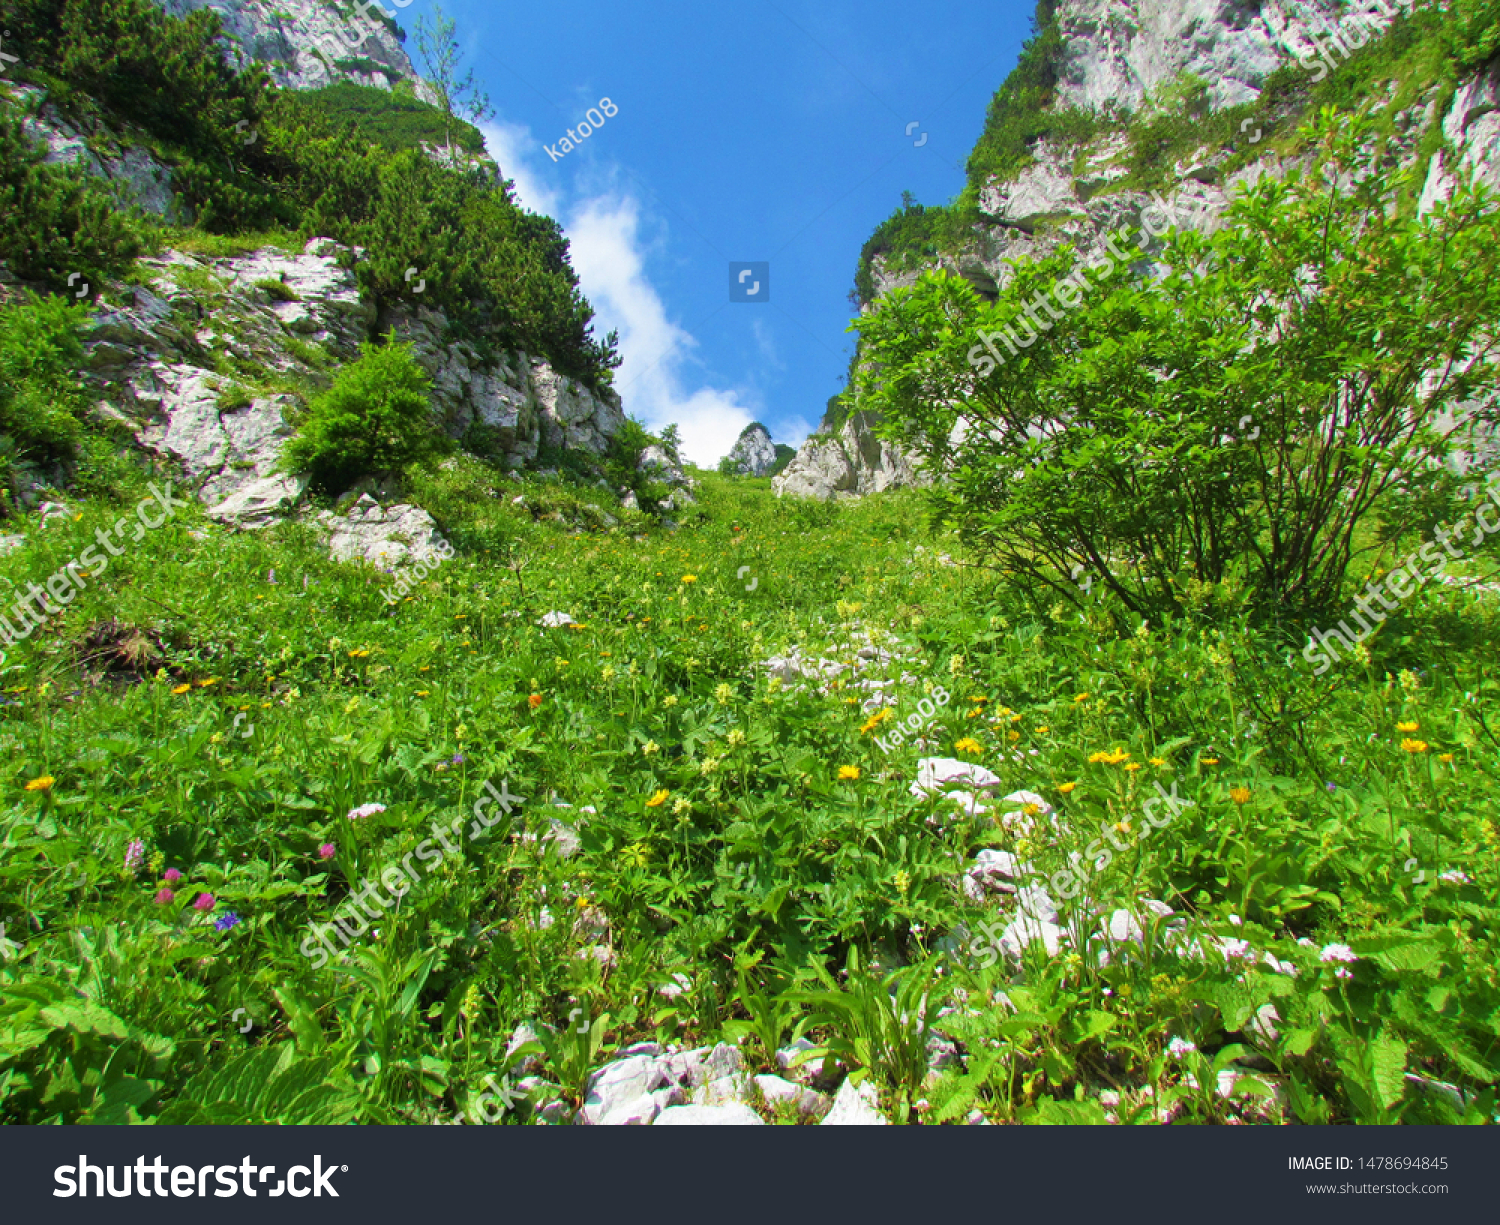 Mountain slope full of blooming wildflowers, lush grass and bush vegetation surrounded by rockwalls on both sides and clear blue sky in the back under Crna Prst in Julian alps in Slovenia #1478694845